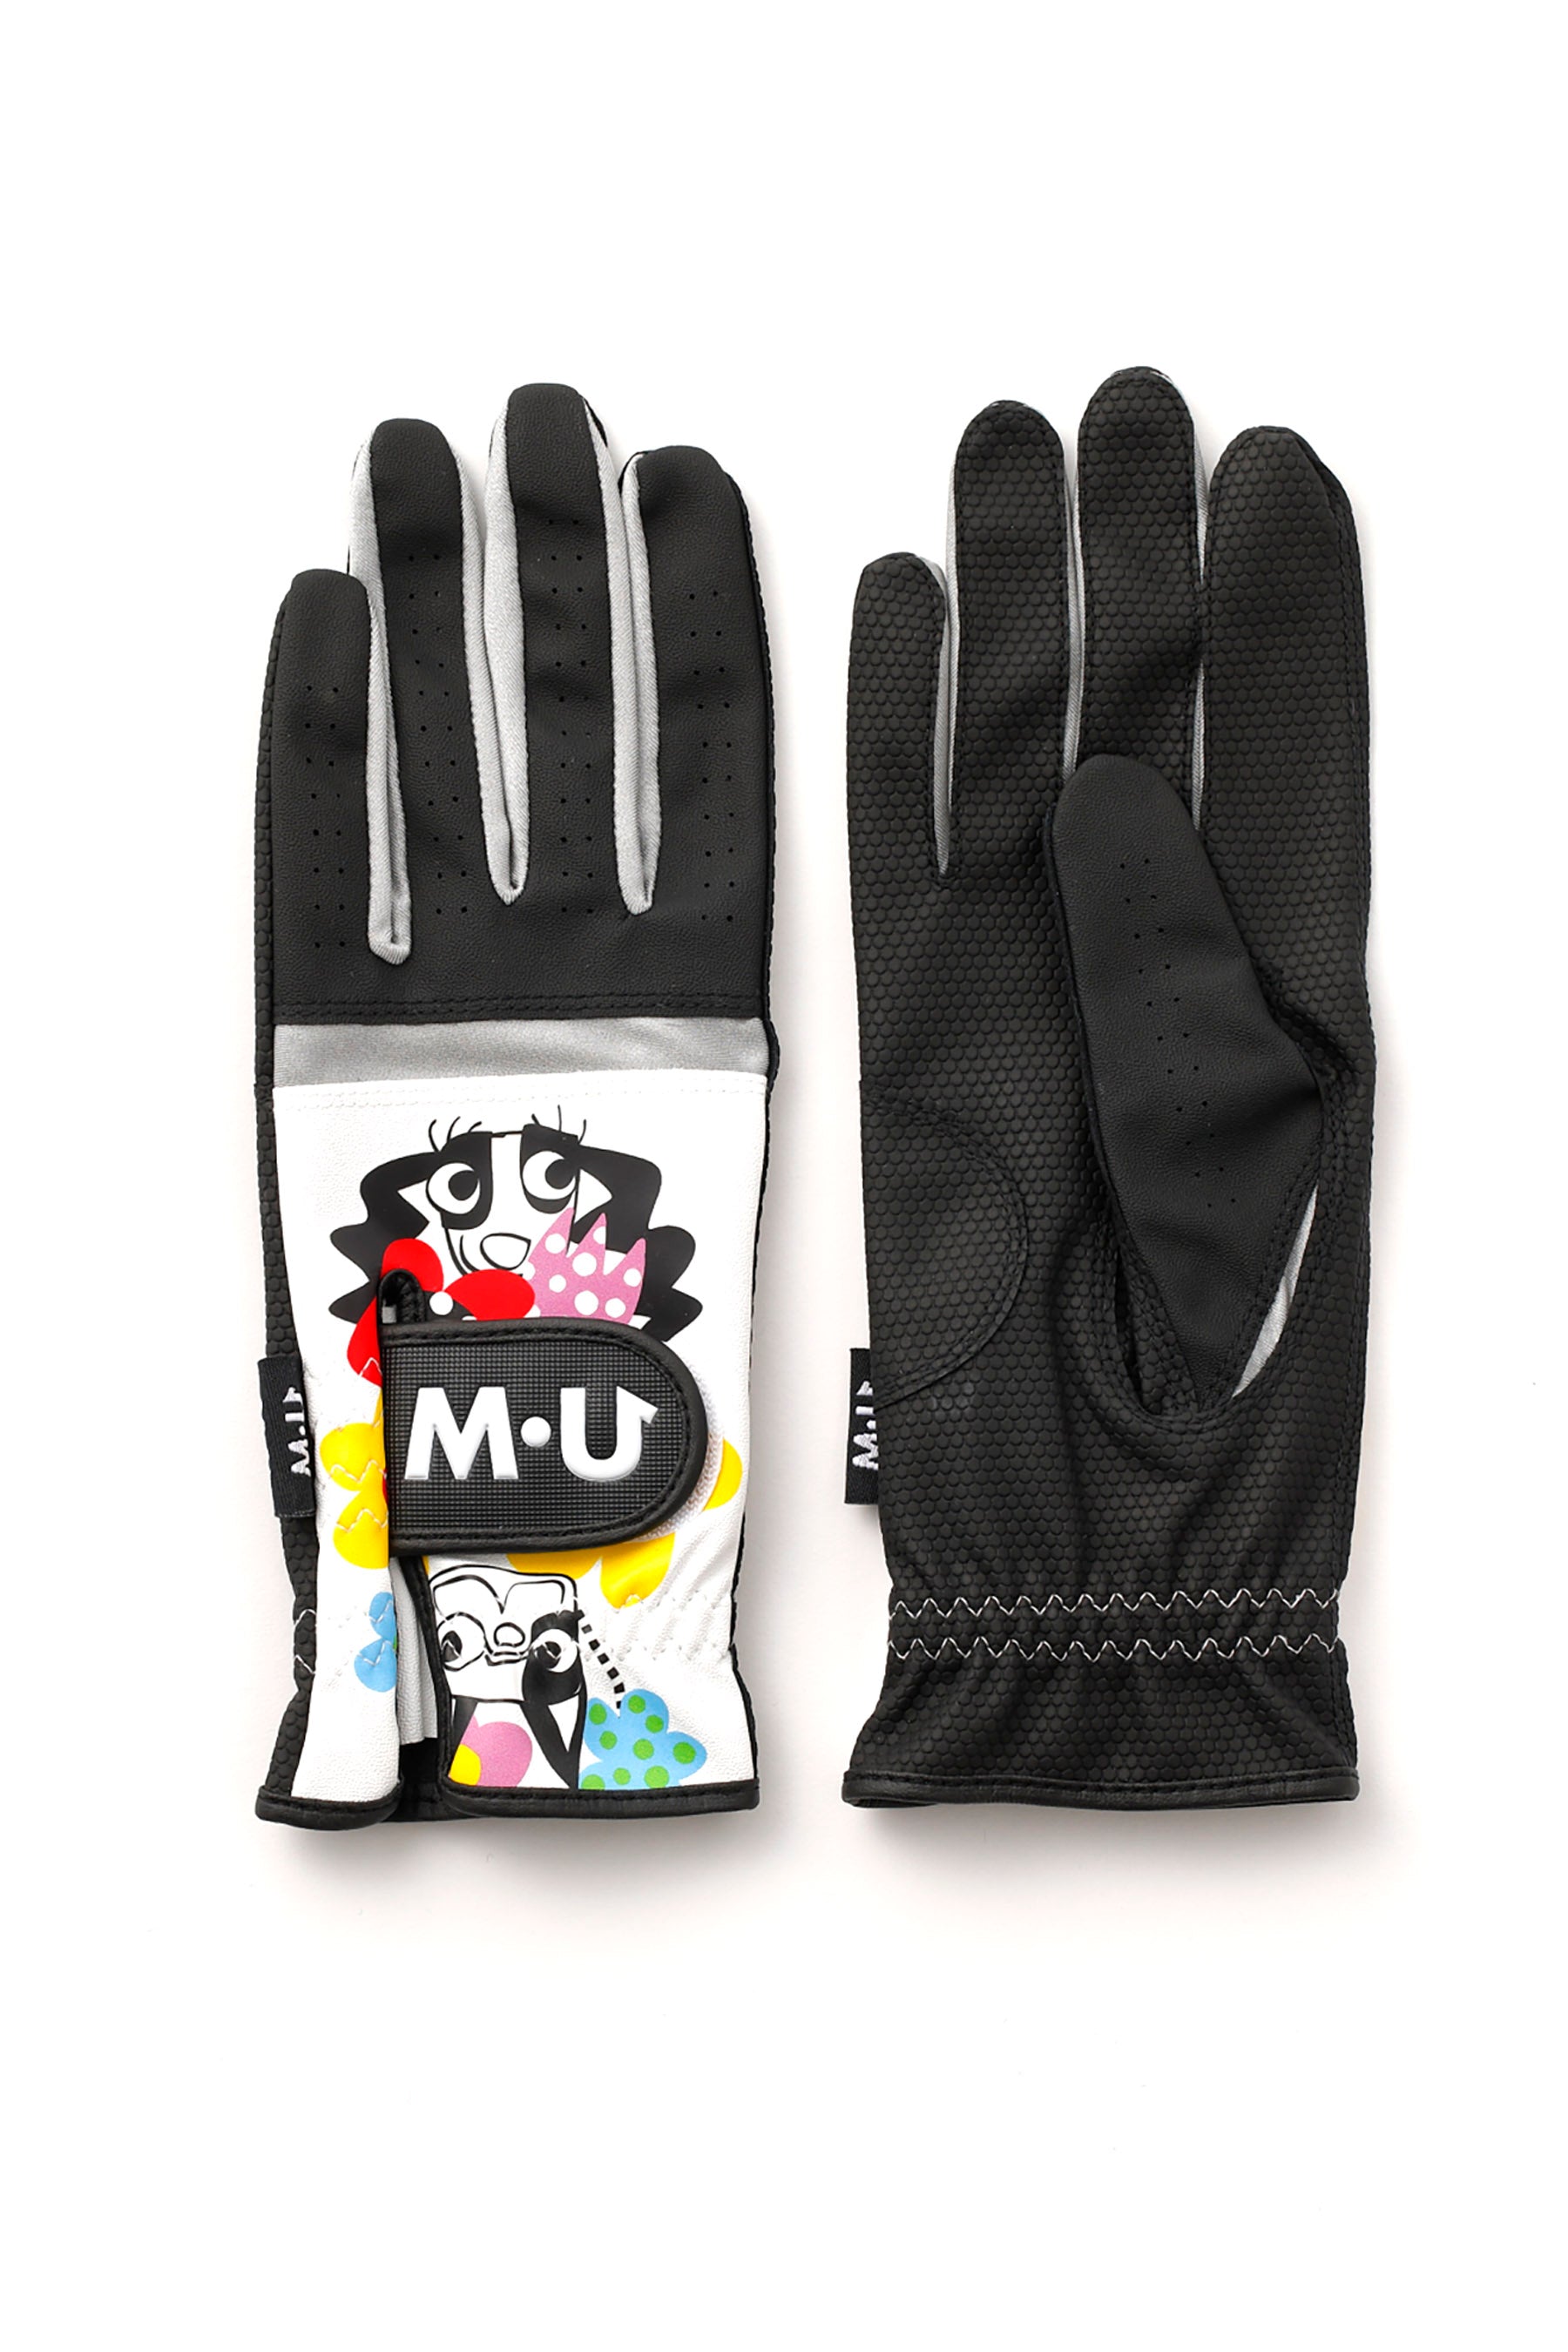 MU character print two-handed gloves (703Q1806)